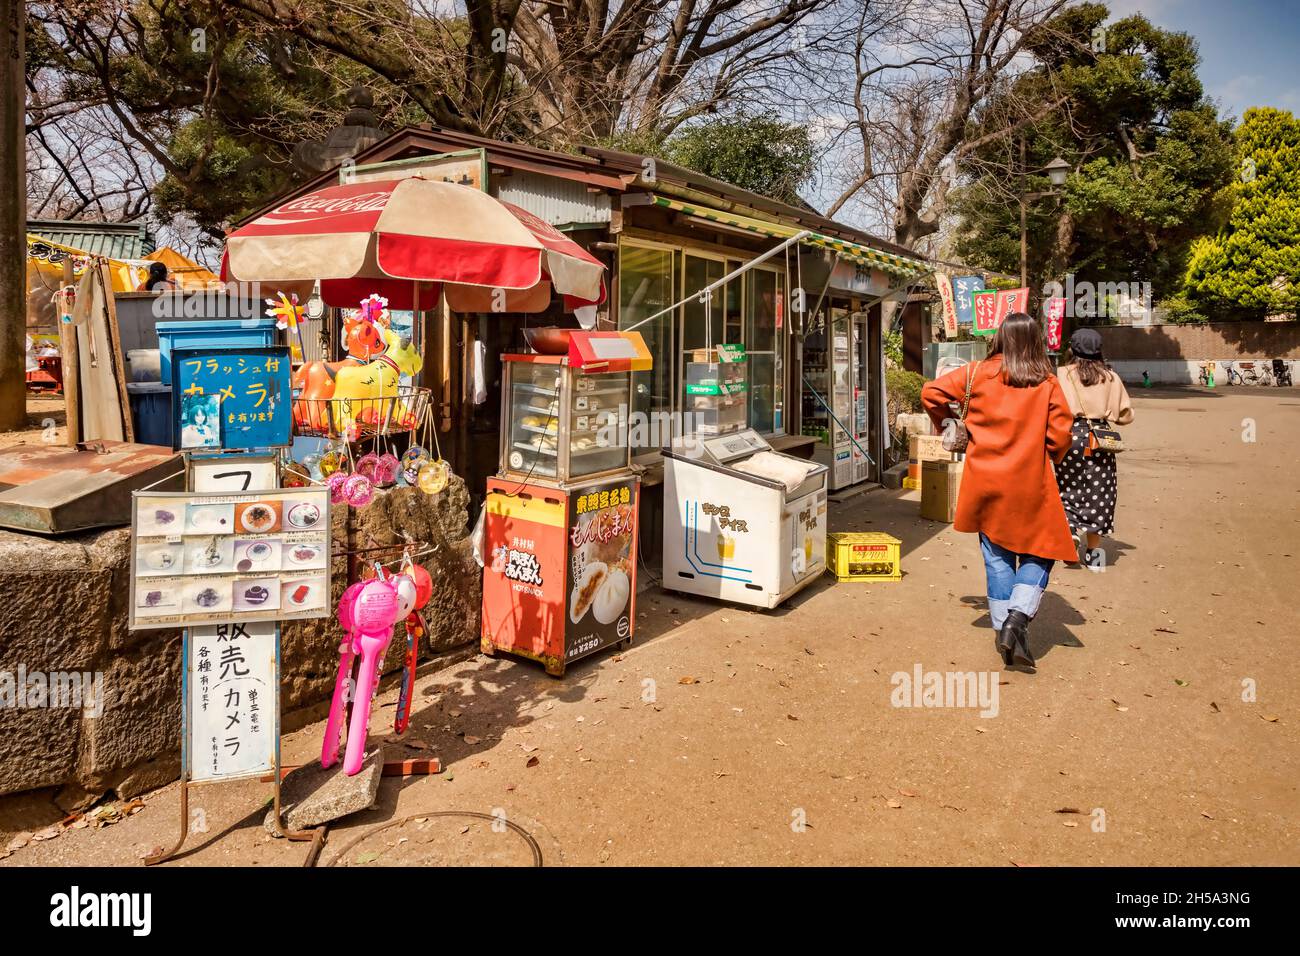 22 March 2019: Tokyo, Japan - Shop selling food and souvenirs in Ueno Onshi Park, Tokyo, in spring. Stock Photo